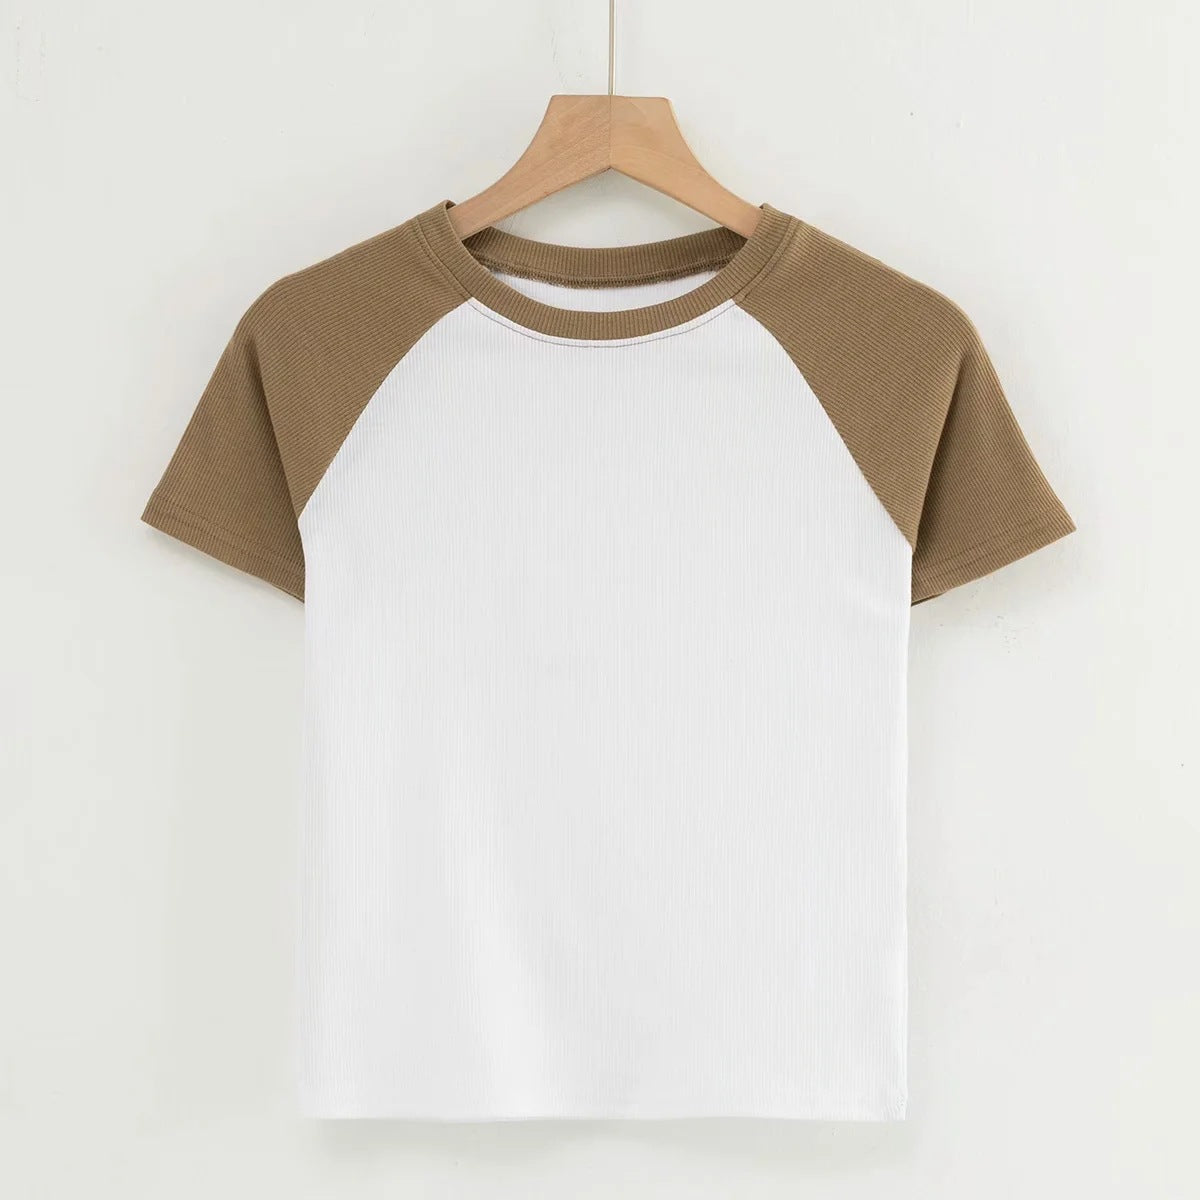 Contrast Stitching Short-sleeved T-shirt